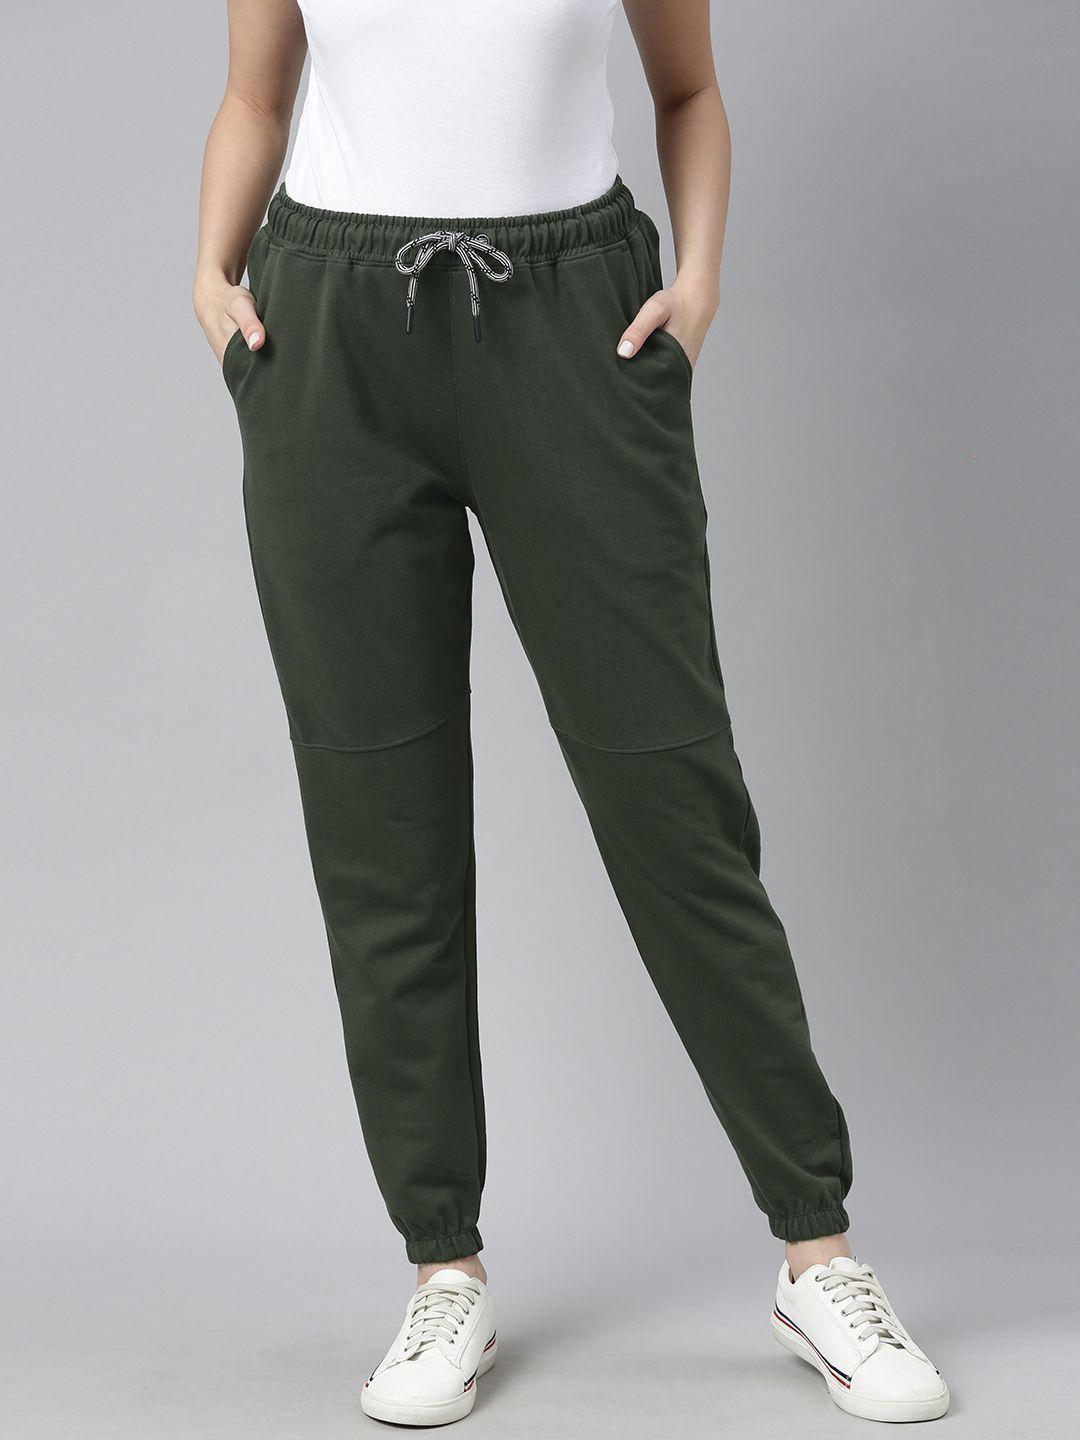 harvard-women-olive-green-solid-pure-cotton-joggers